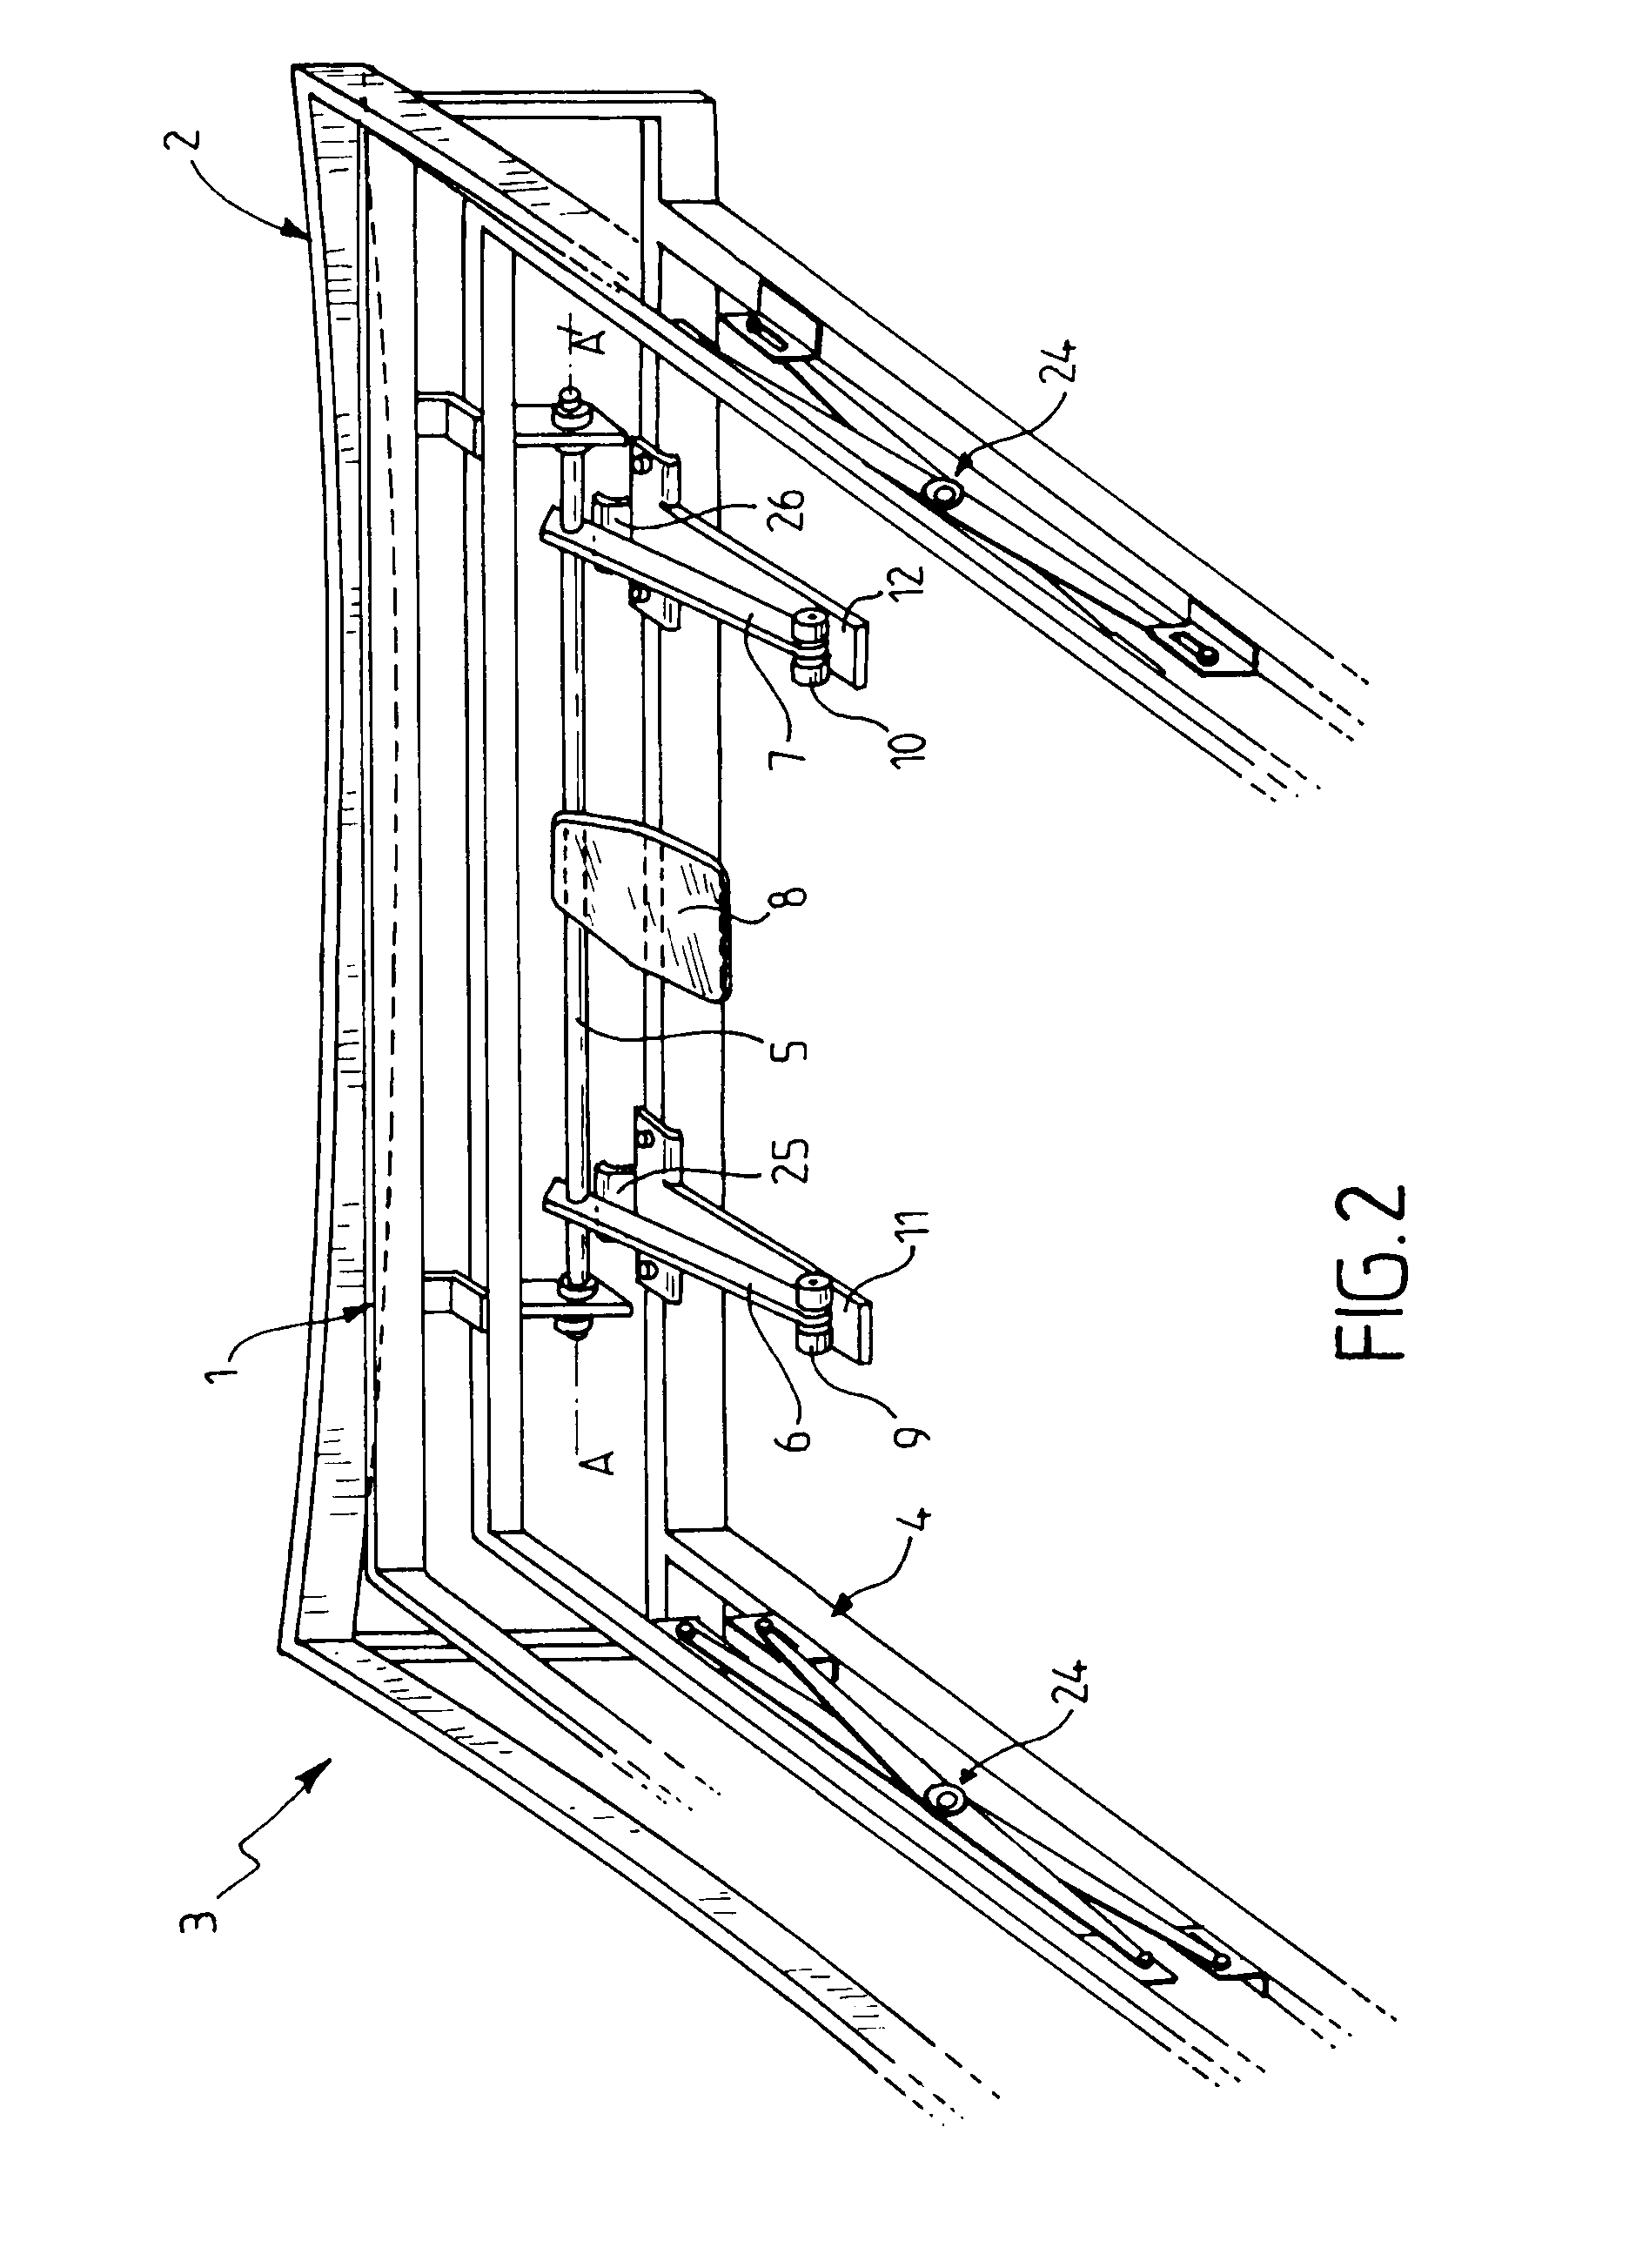 Device for gravity-bending glass on several support moulds with controlled transition between moulds